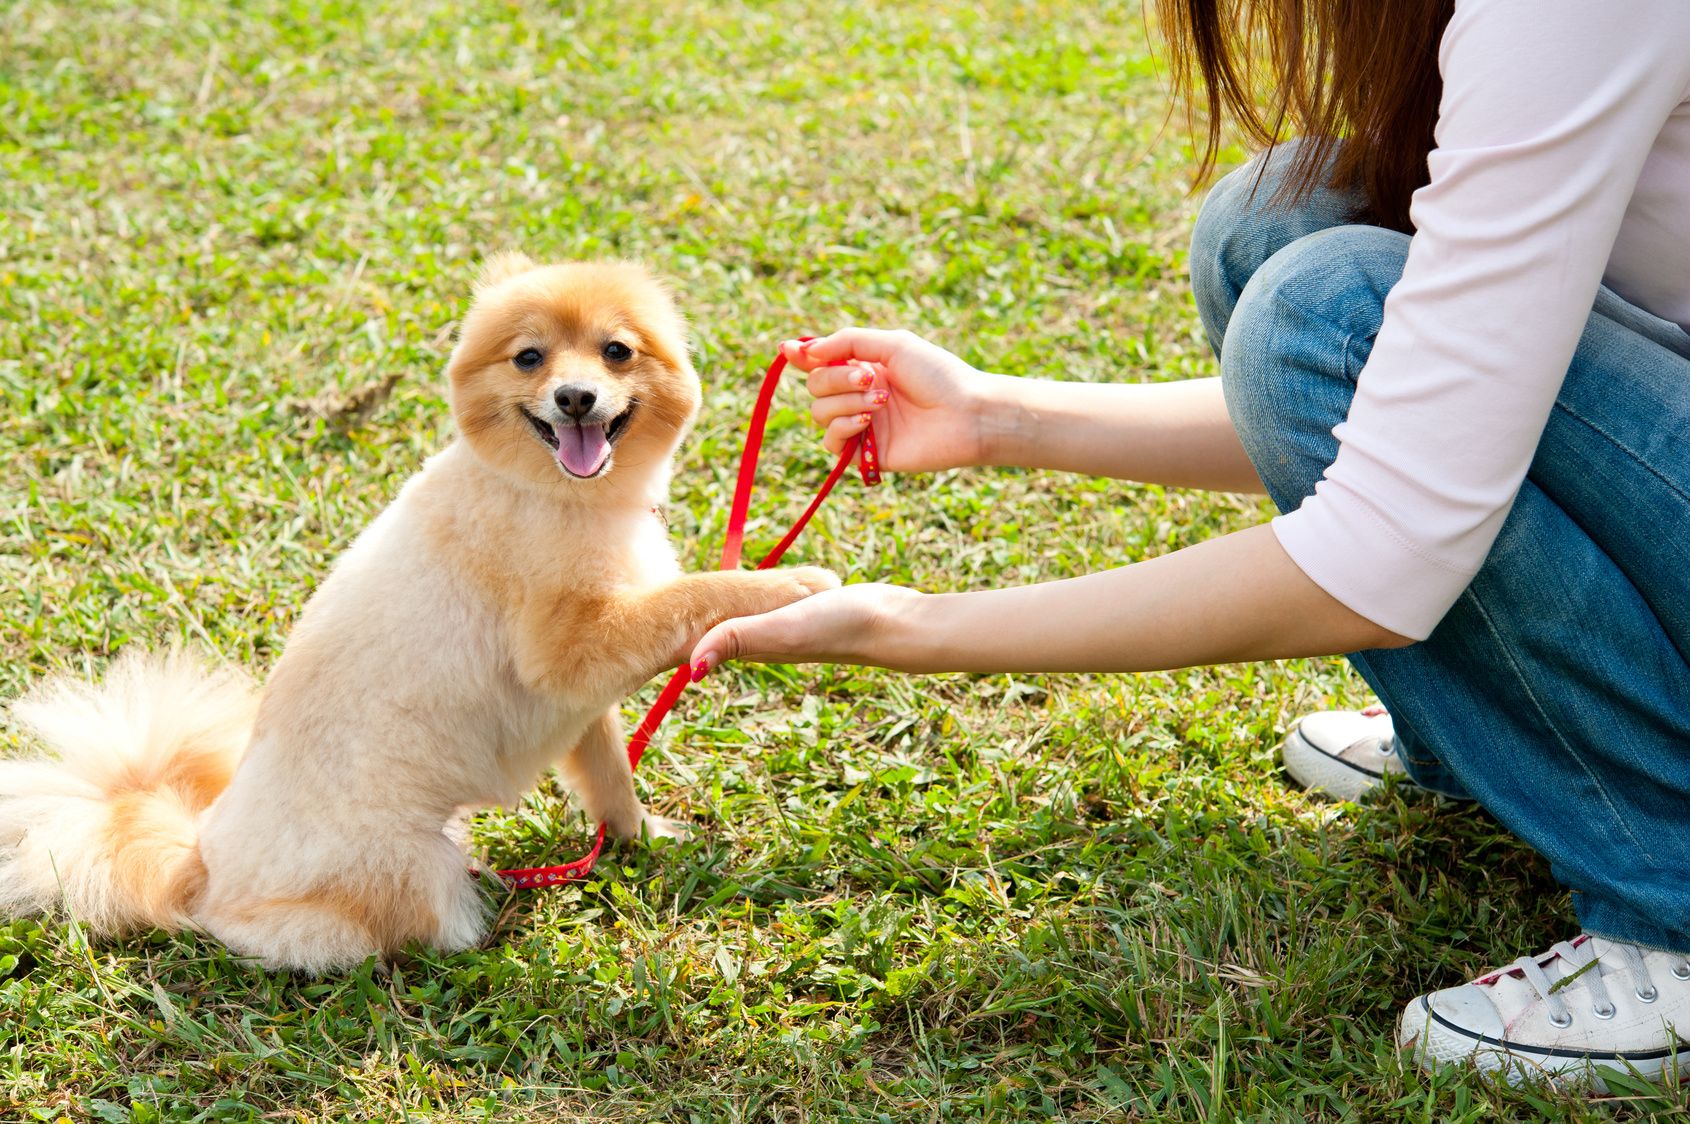 attractive asian woman with dog in the park